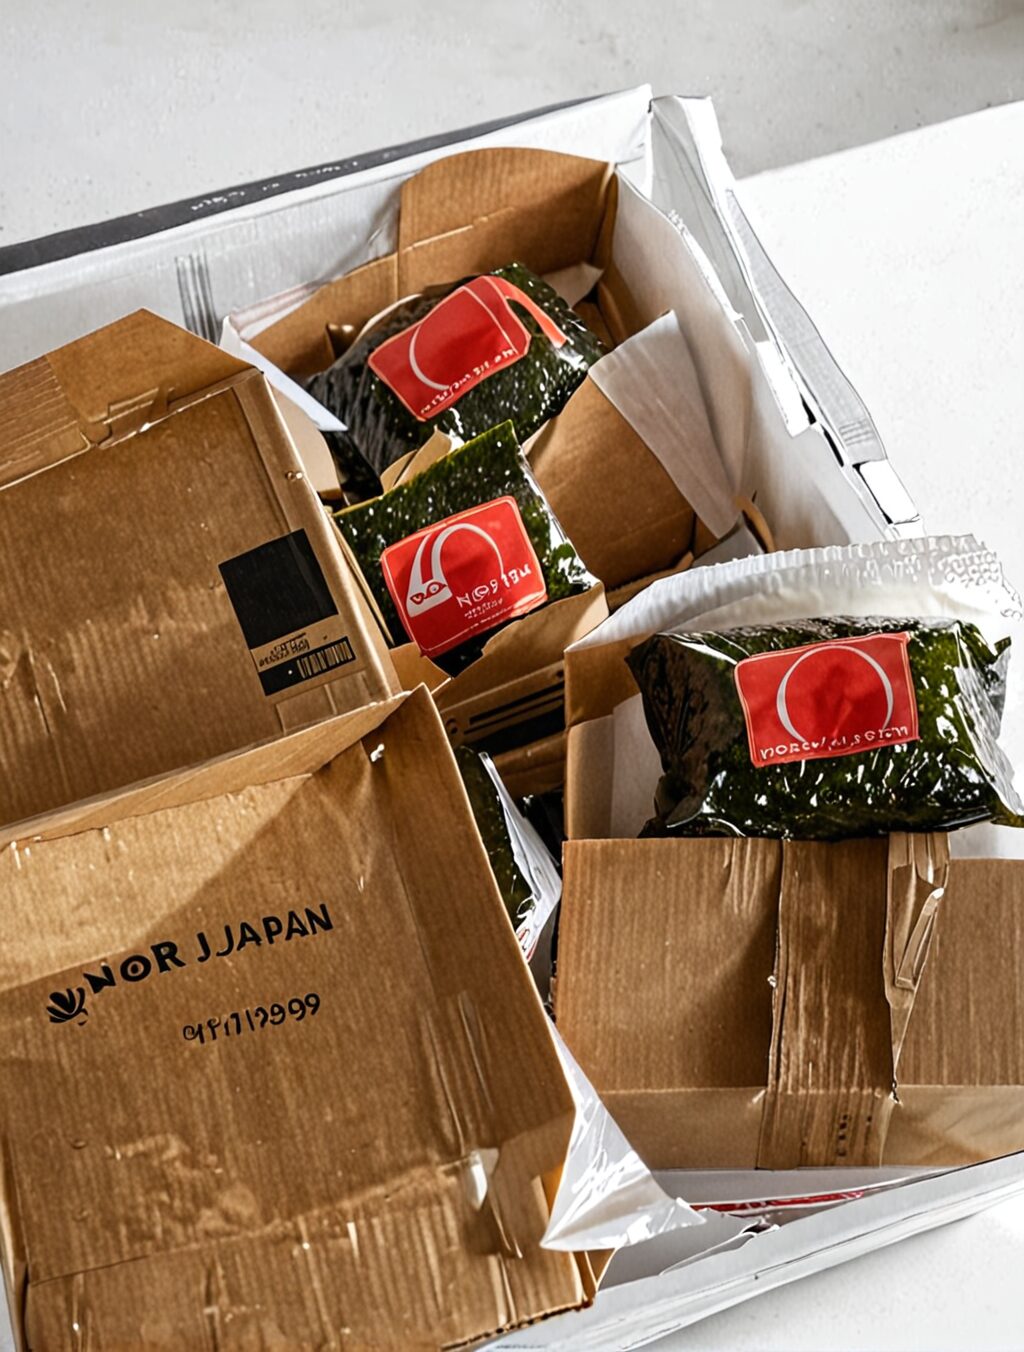 nori japan delivery